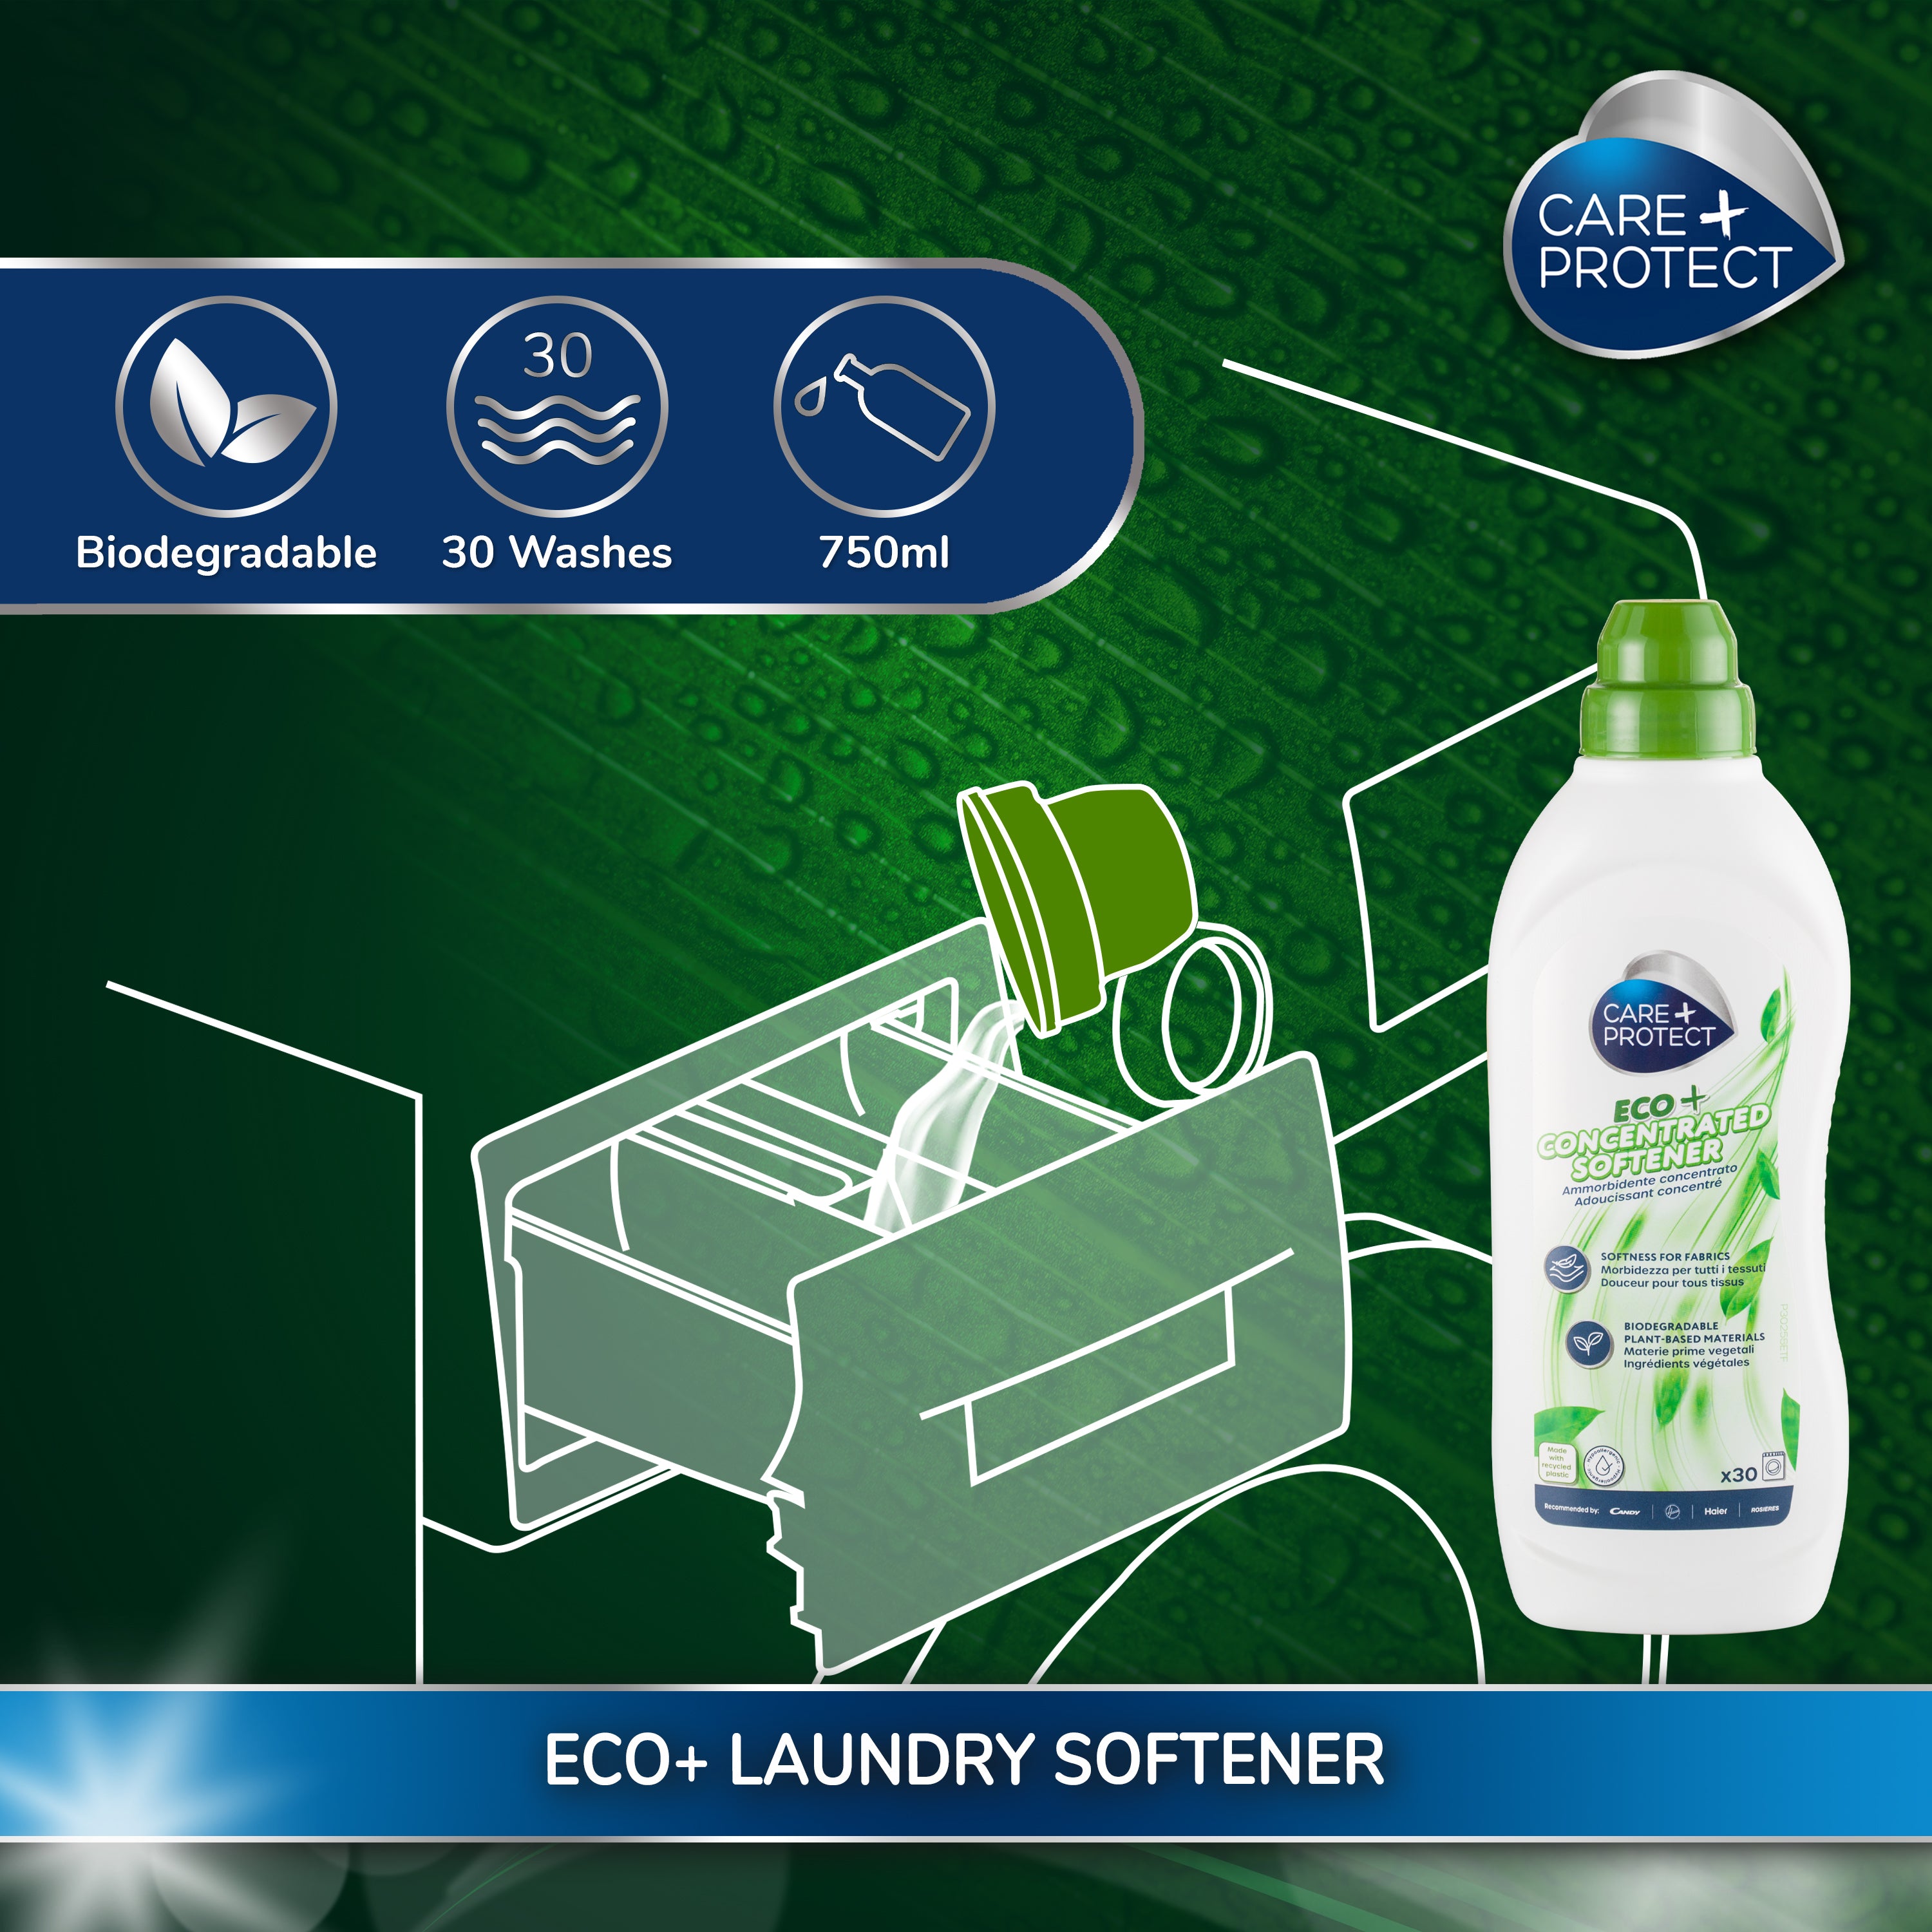 CARE + PROTECT ECO+ Laundry Softener, Ideal for All Types of Fabrics, Softens Fabrics and Facilitates Ironing 750 ml for Up to 30 Washes